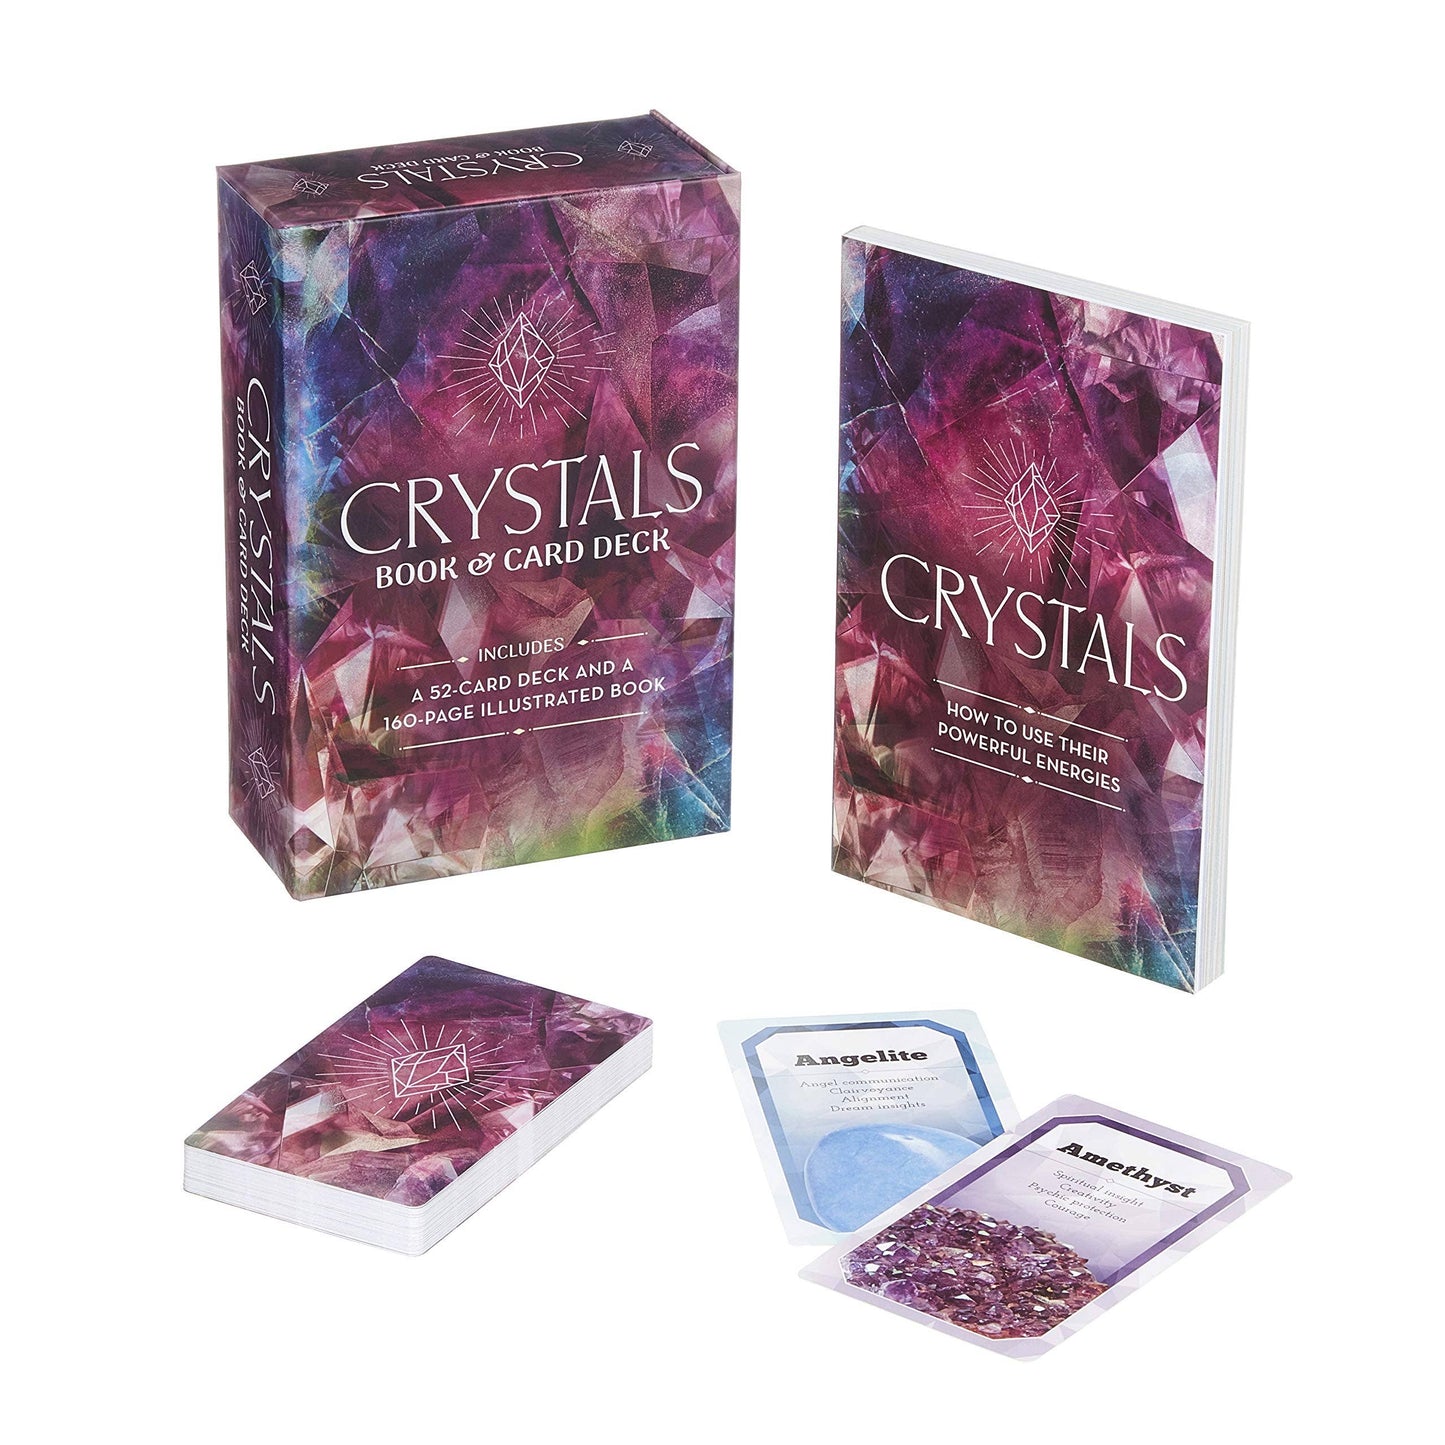 Crystals Book And Card Deck by Emily Anderson